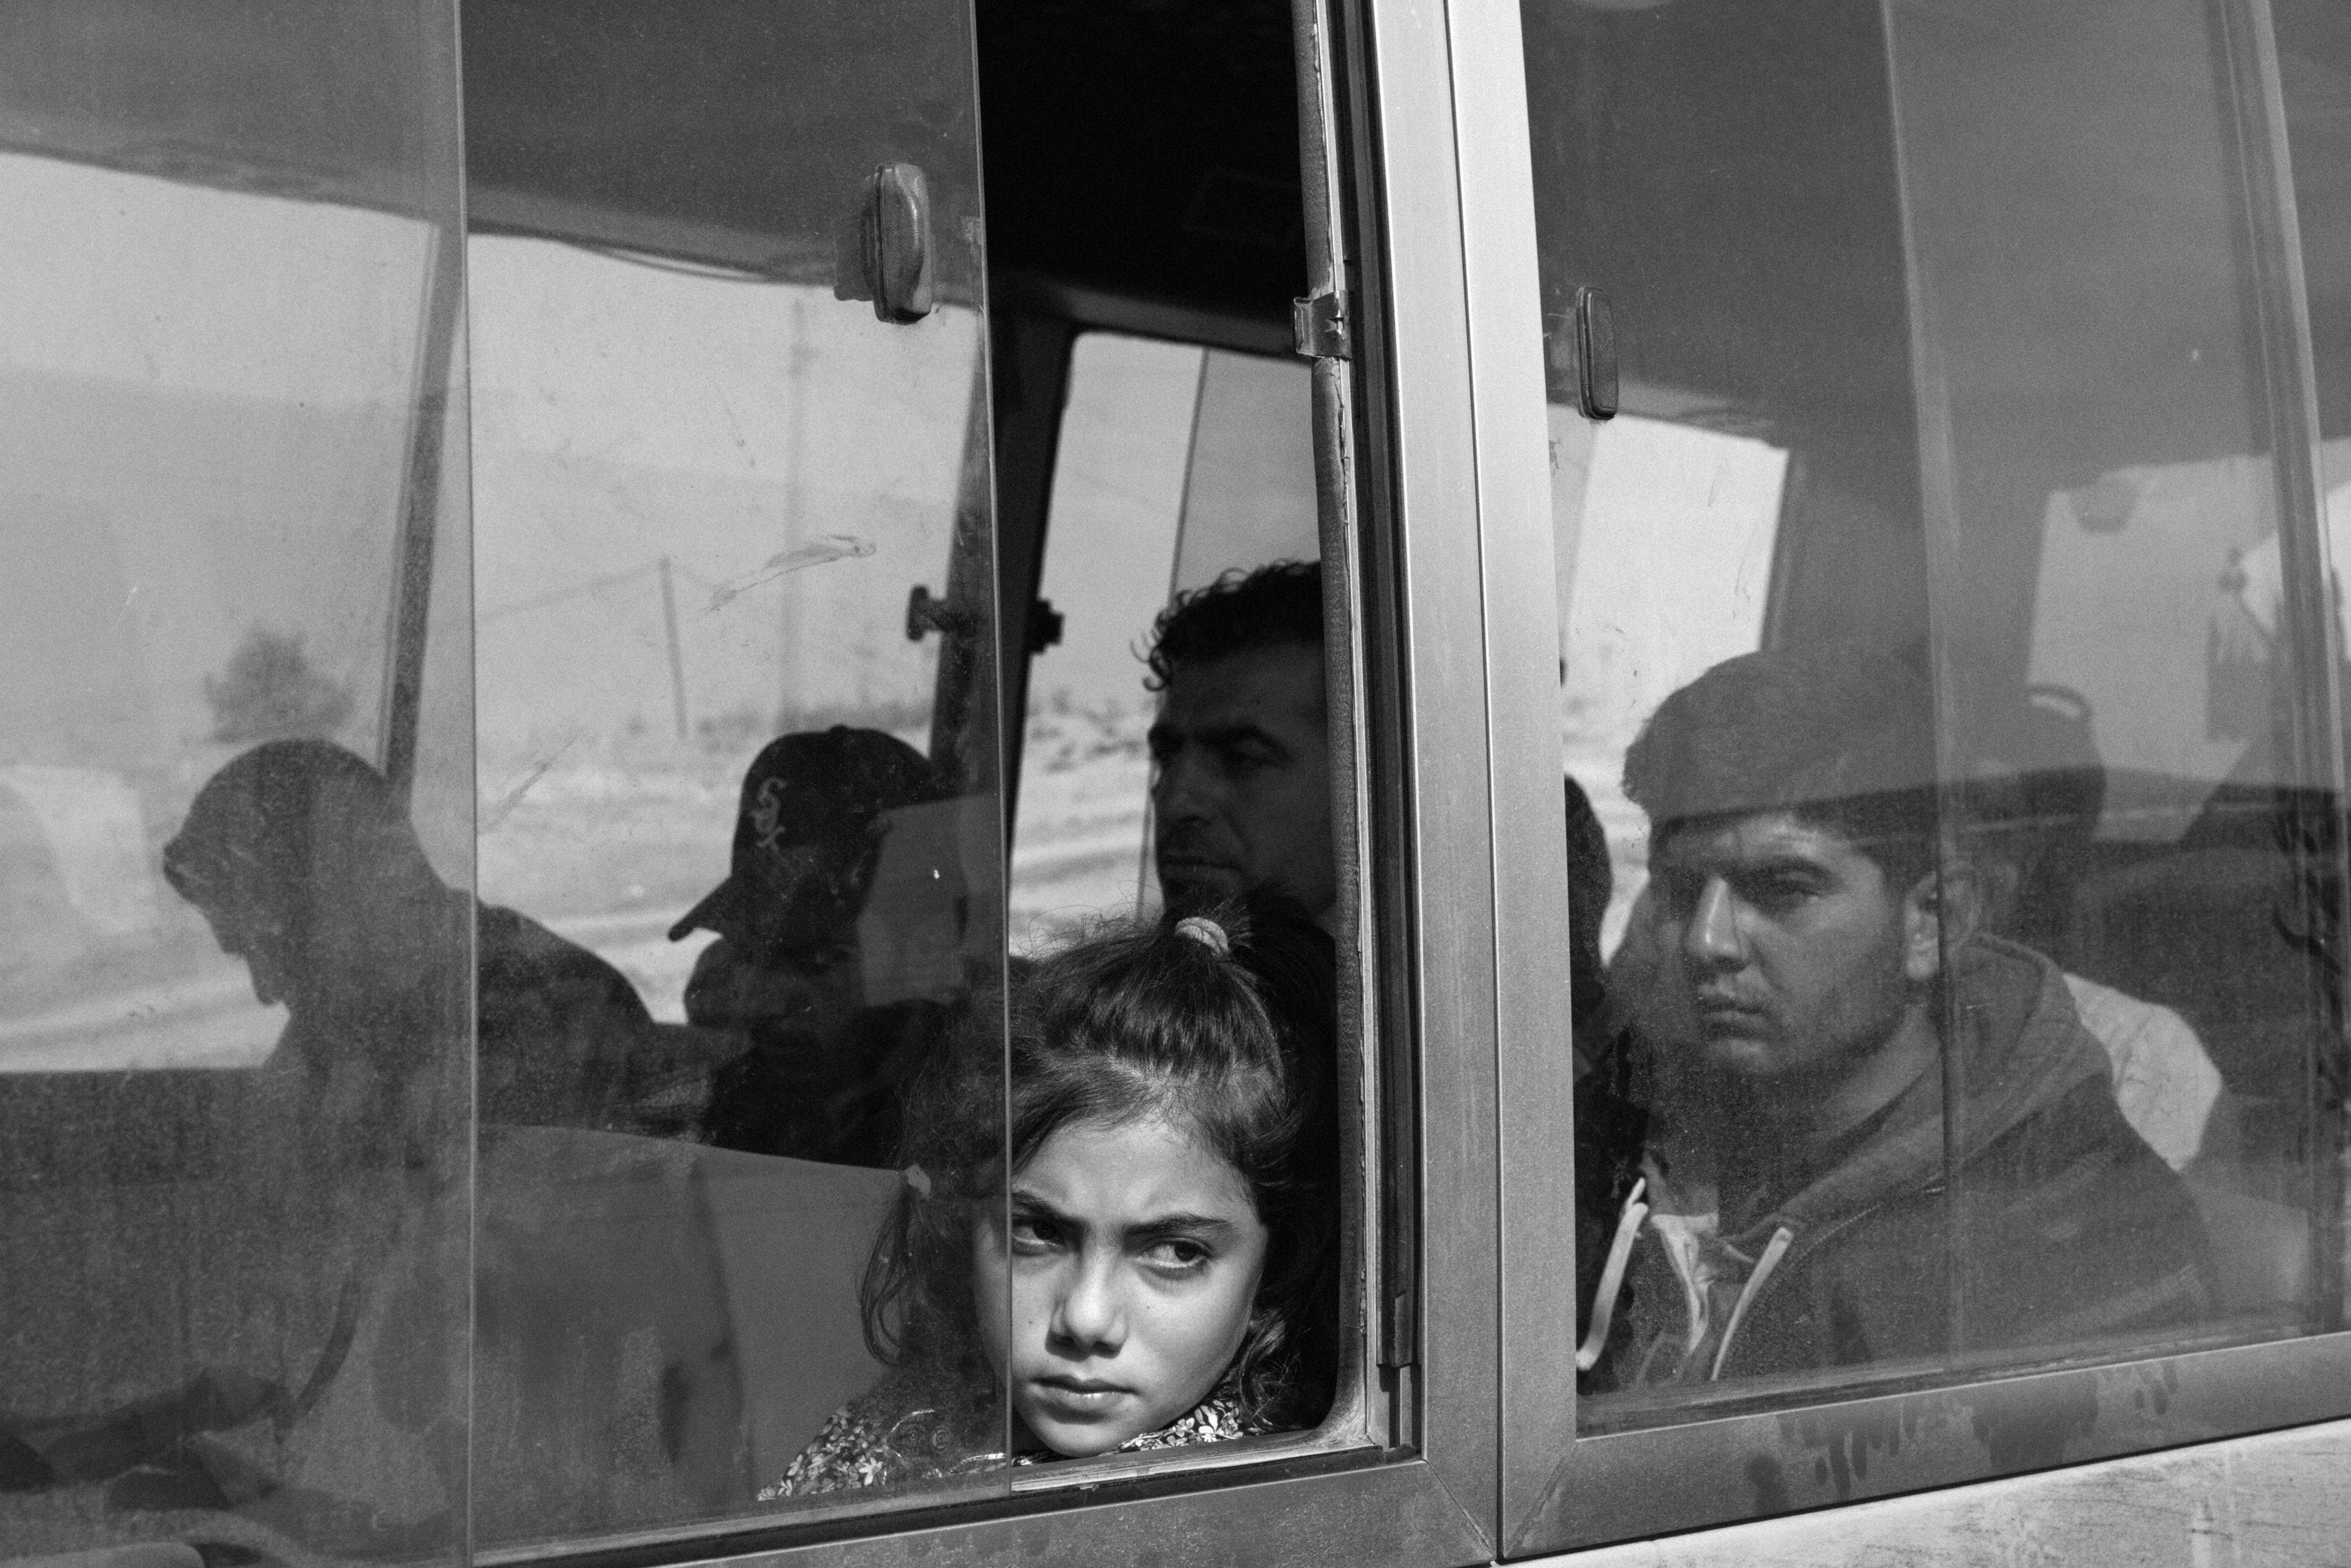 Chartered buses transport Kurdish refugees from northeastern Syria to Bardarash camp in Dohuk province, Iraqi Kurdistan. This photo was taken at the Sahela border post.